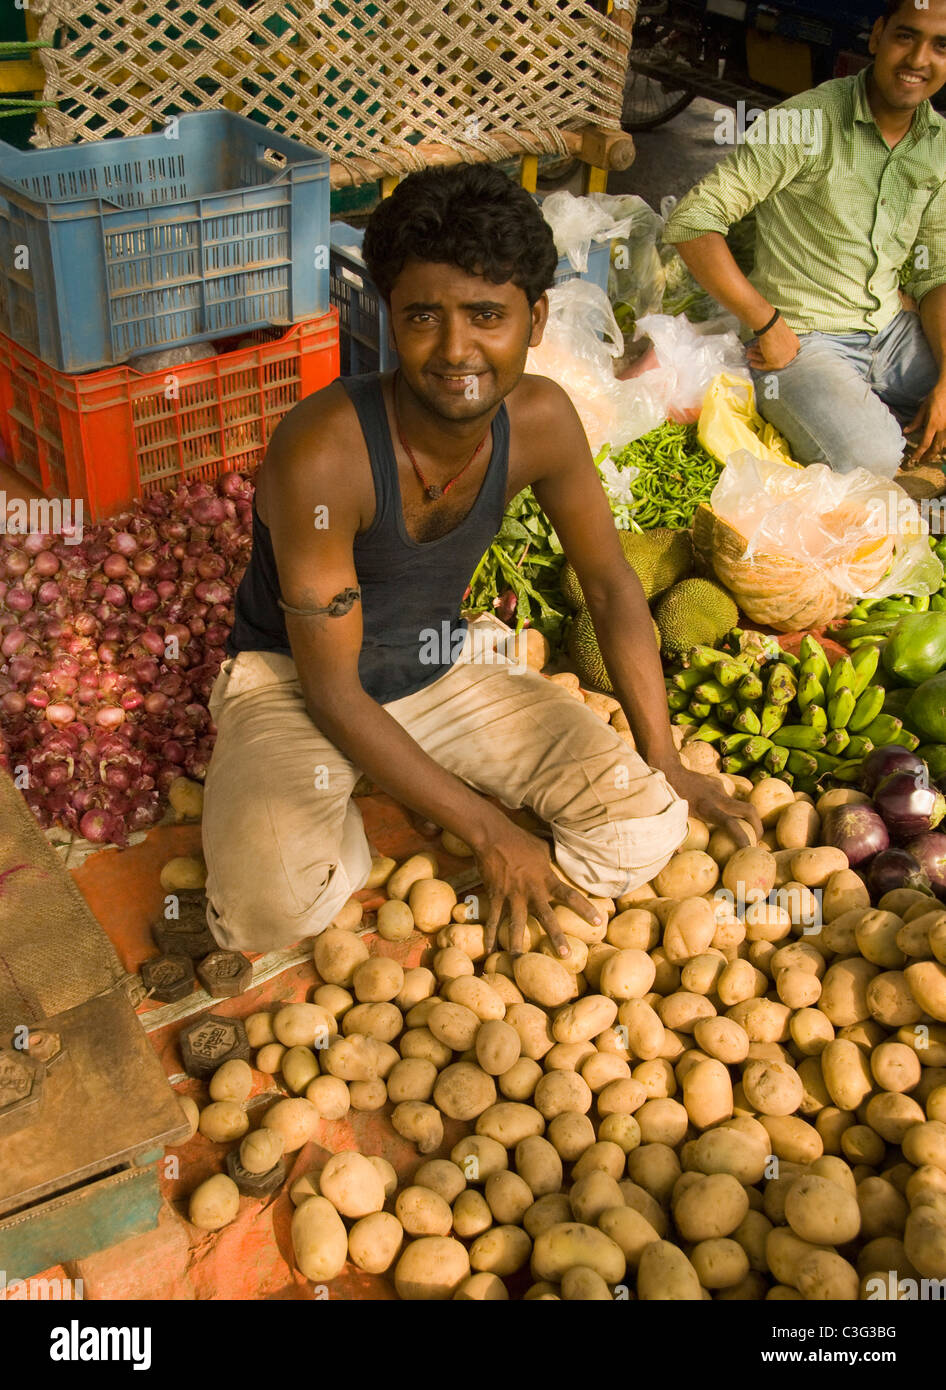 Portrait of a man selling vegetables at a market stall, Chandni Chowk, Delhi, India Stock Photo